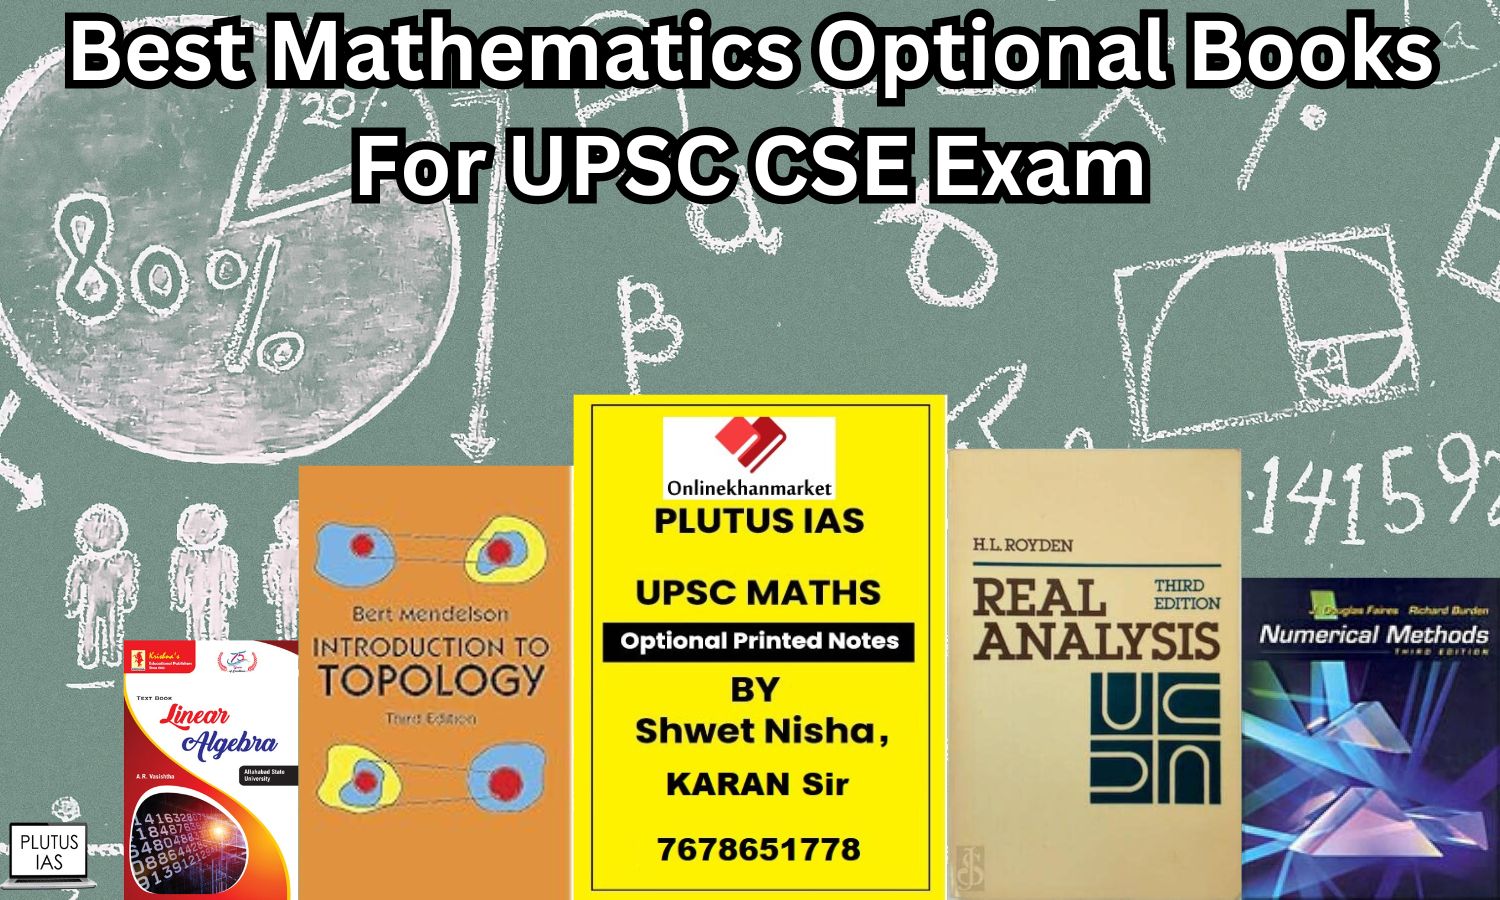 Best Maths Books For Optional Subject In UPSC CSE Exam Mathematics optional books for upsc upsc maths optional books